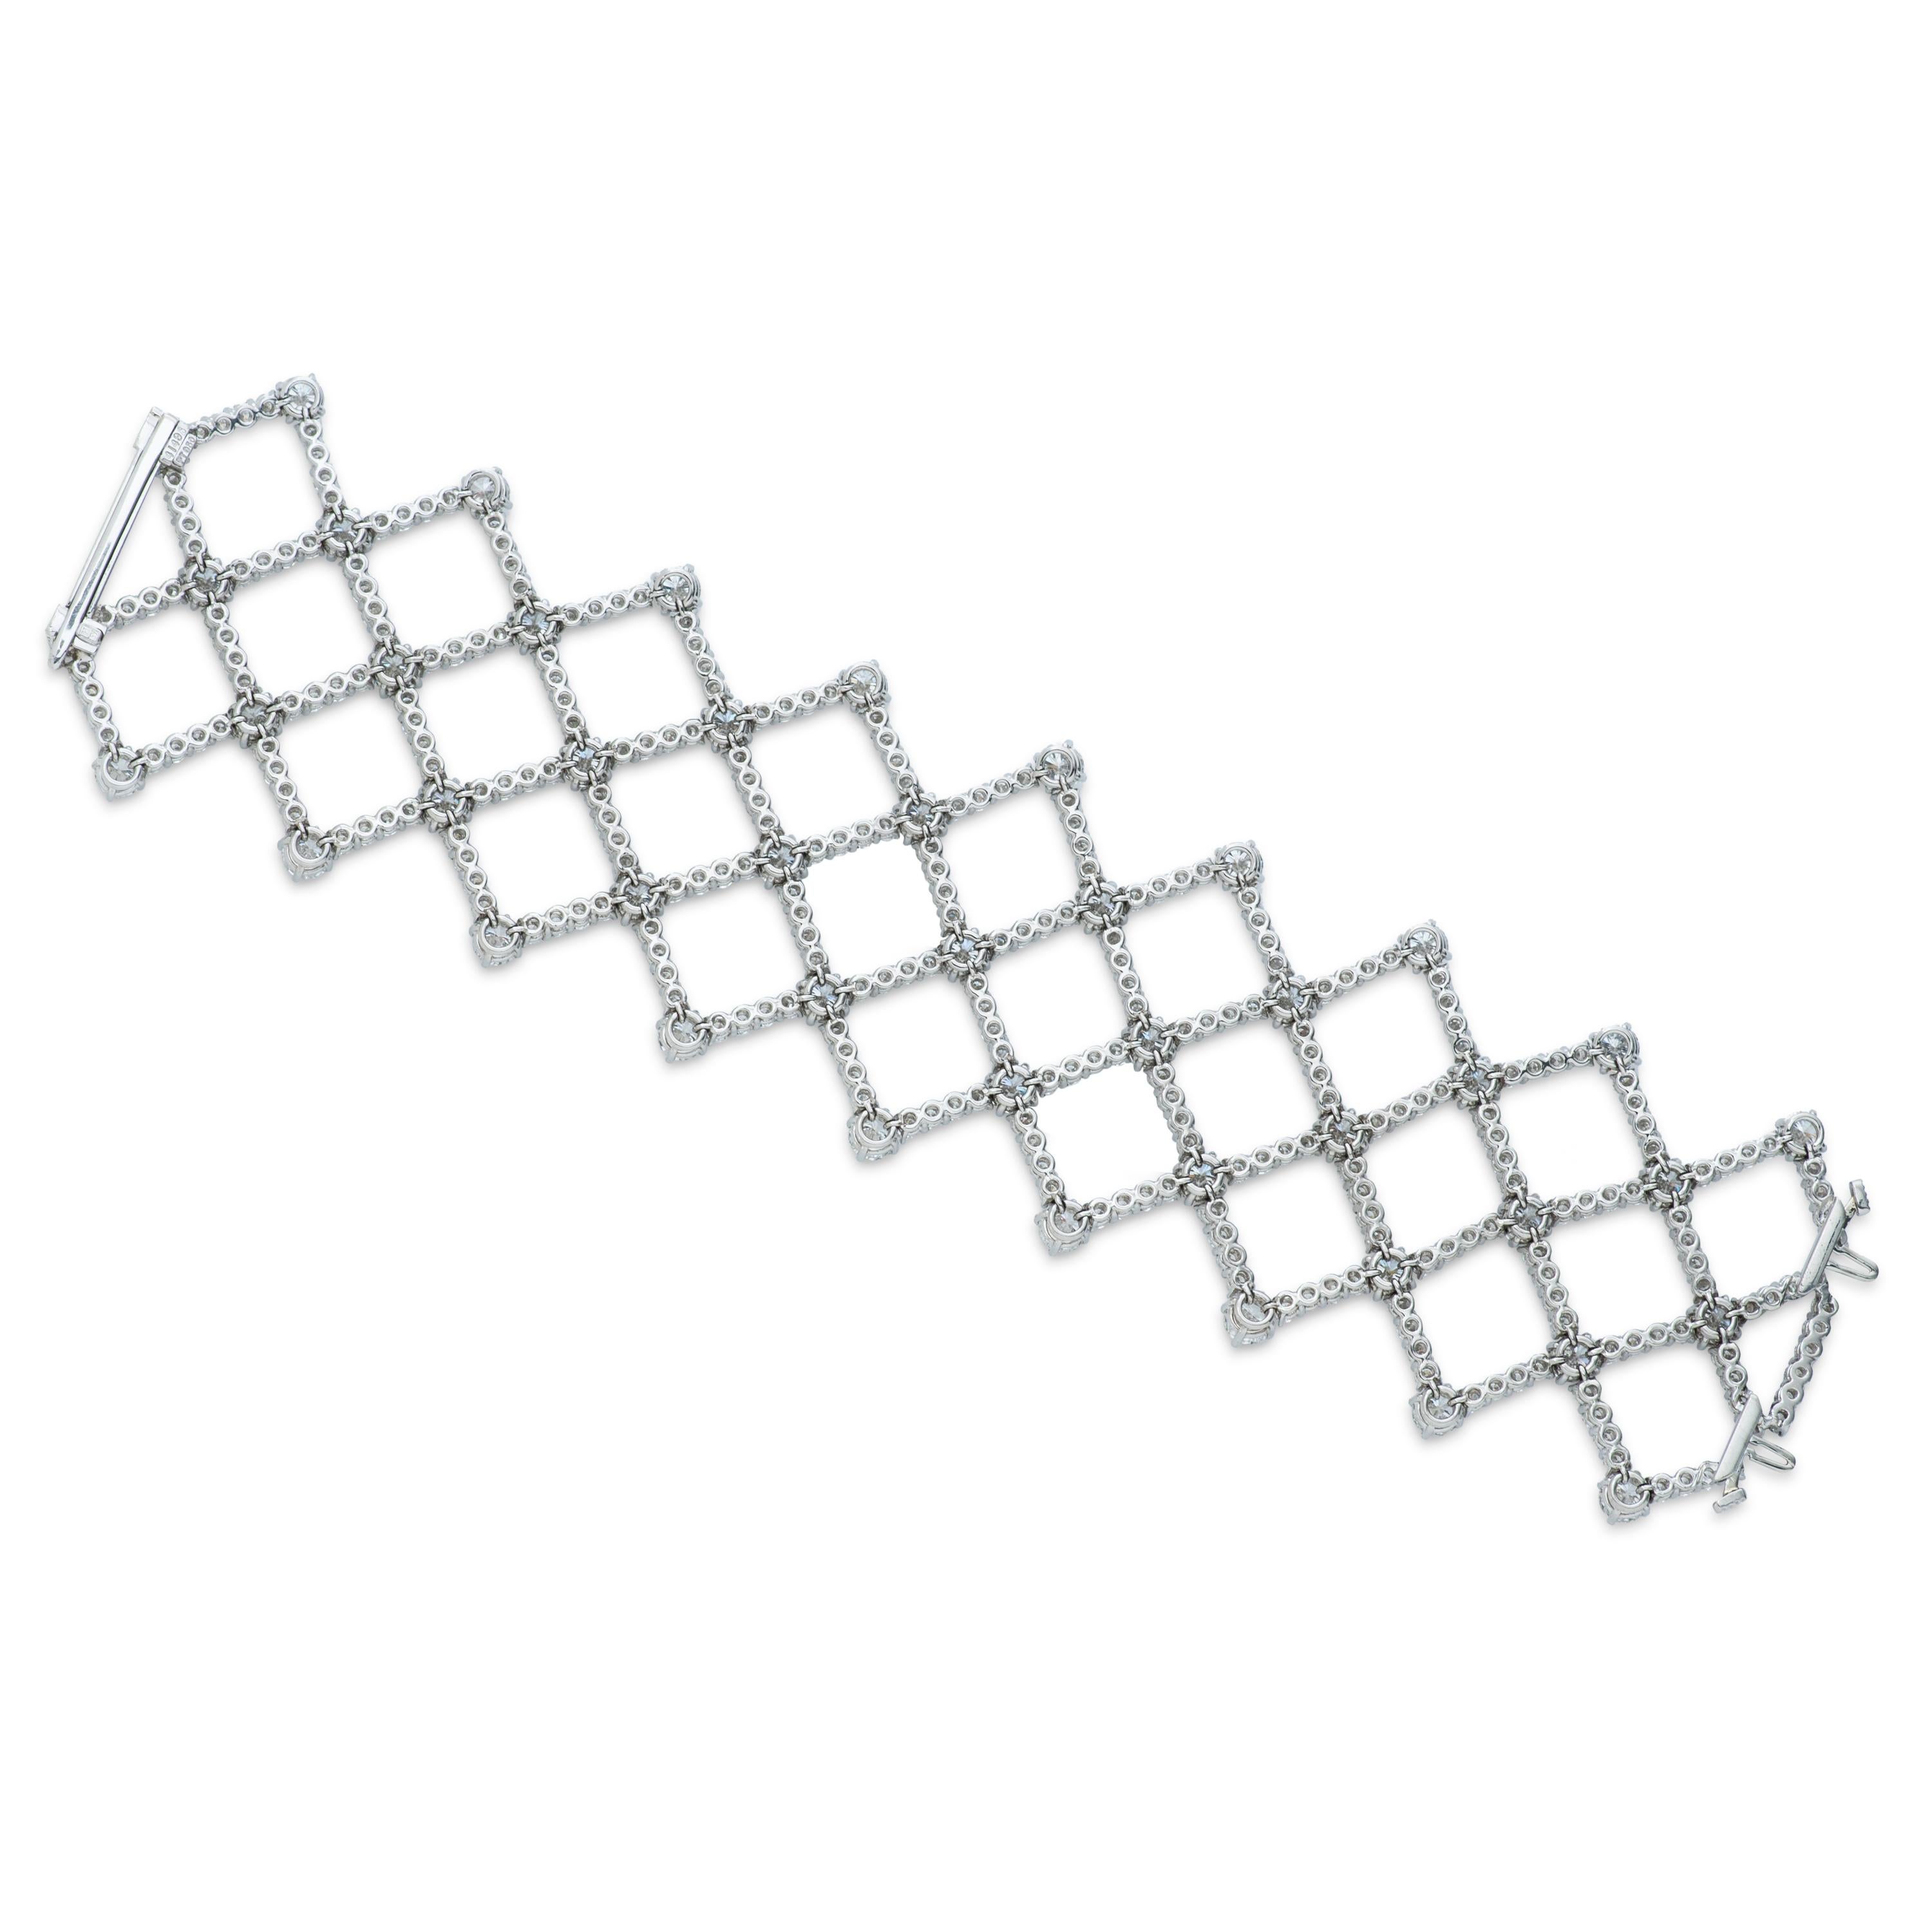 This vintage Harry Winston flexible lattice style bracelet features approximately 26.43 carats of round brilliant cut diamonds set in platinum.  The diamonds are estimated to be E-F color with VVS-VS clarity. 

6.75